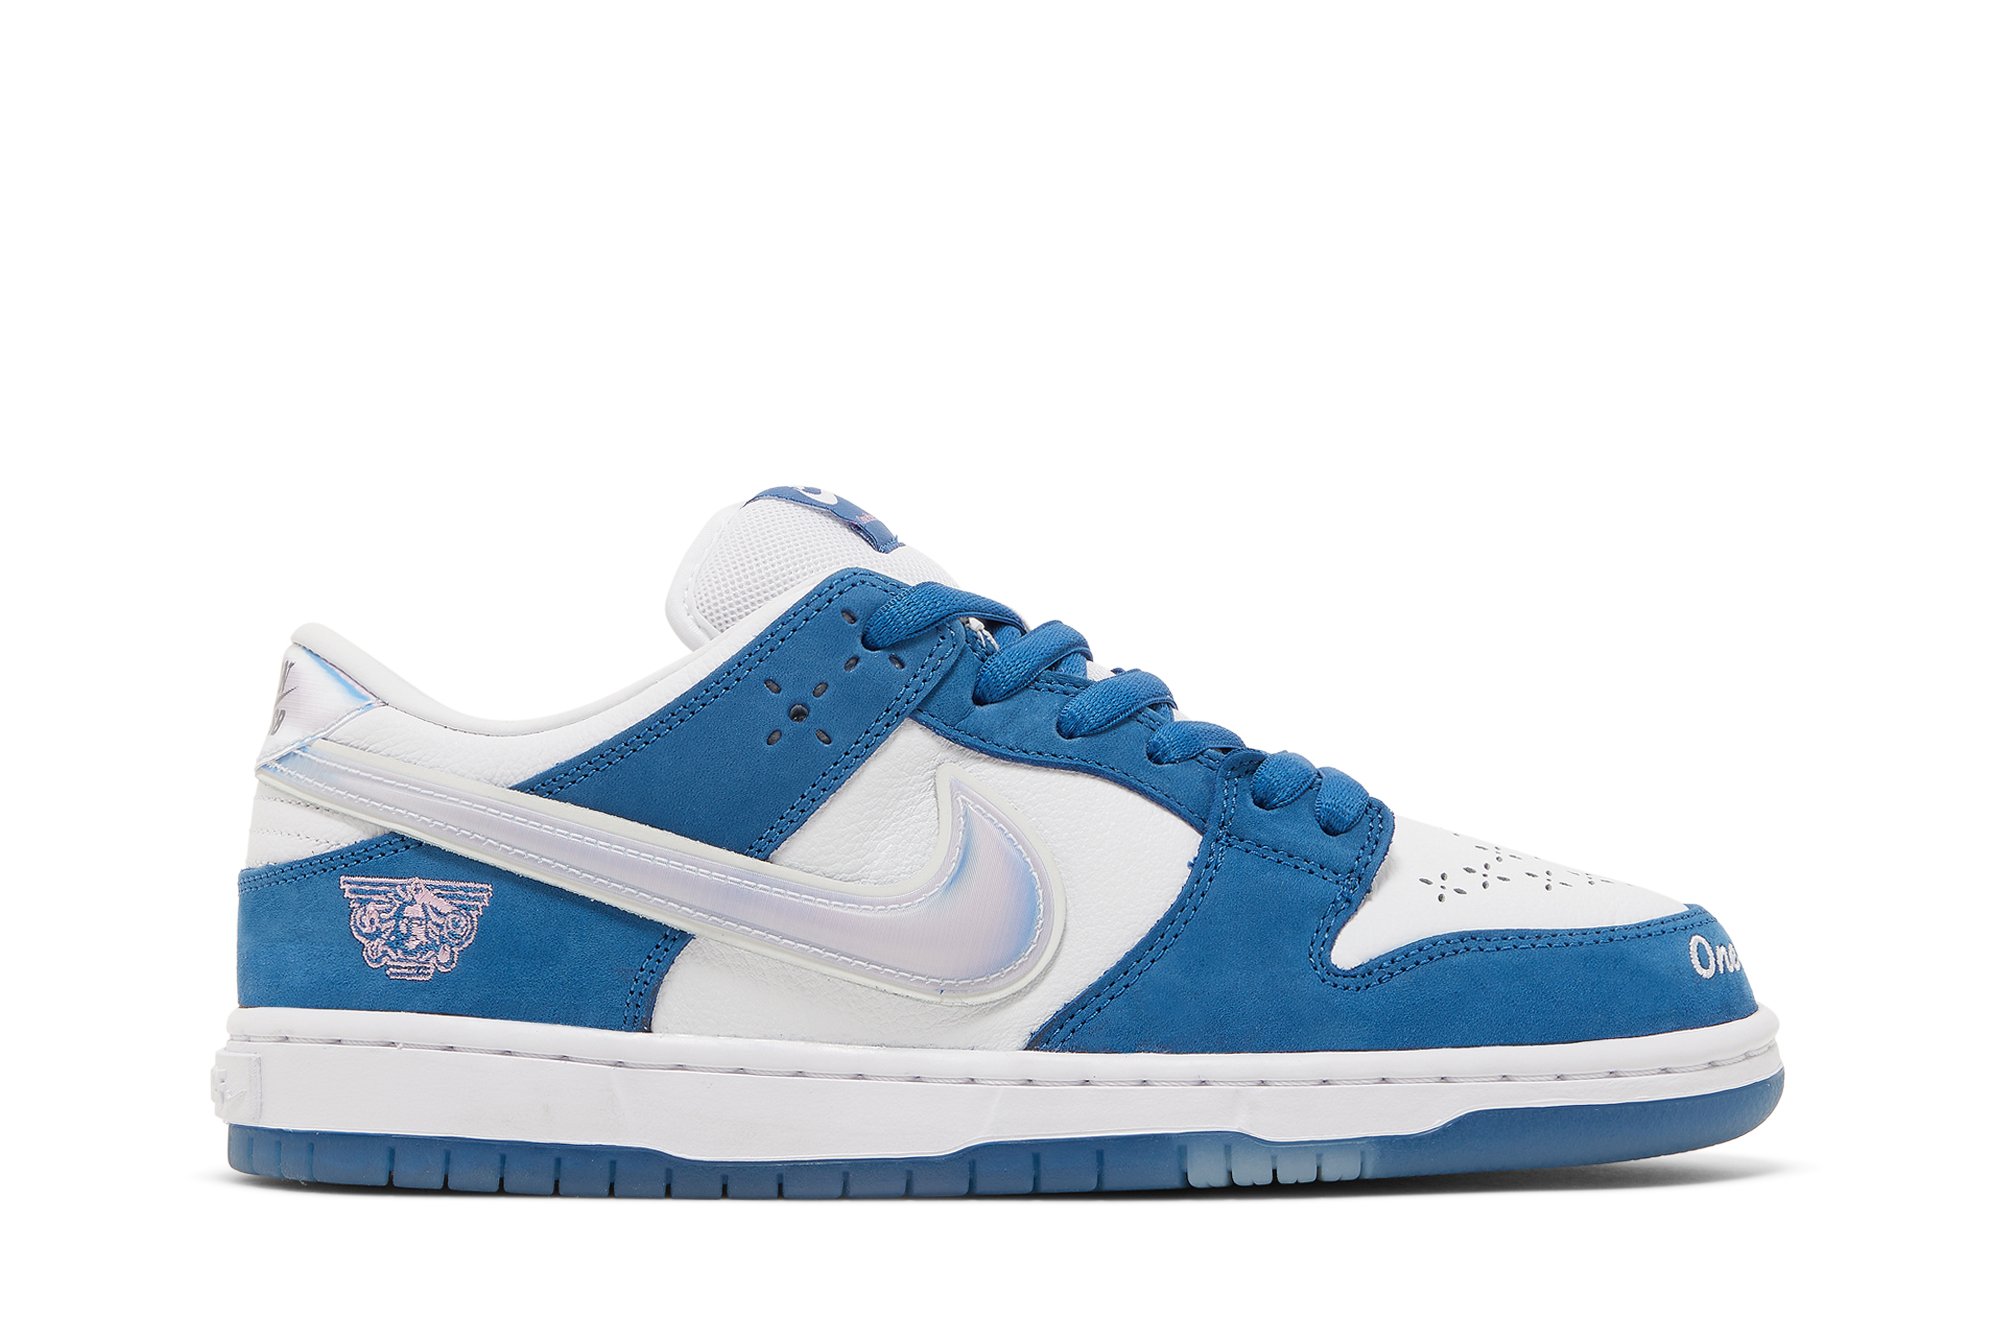 Buy Born x Raised x Dunk Low SB 'One Block at a Time' - FN7819 400